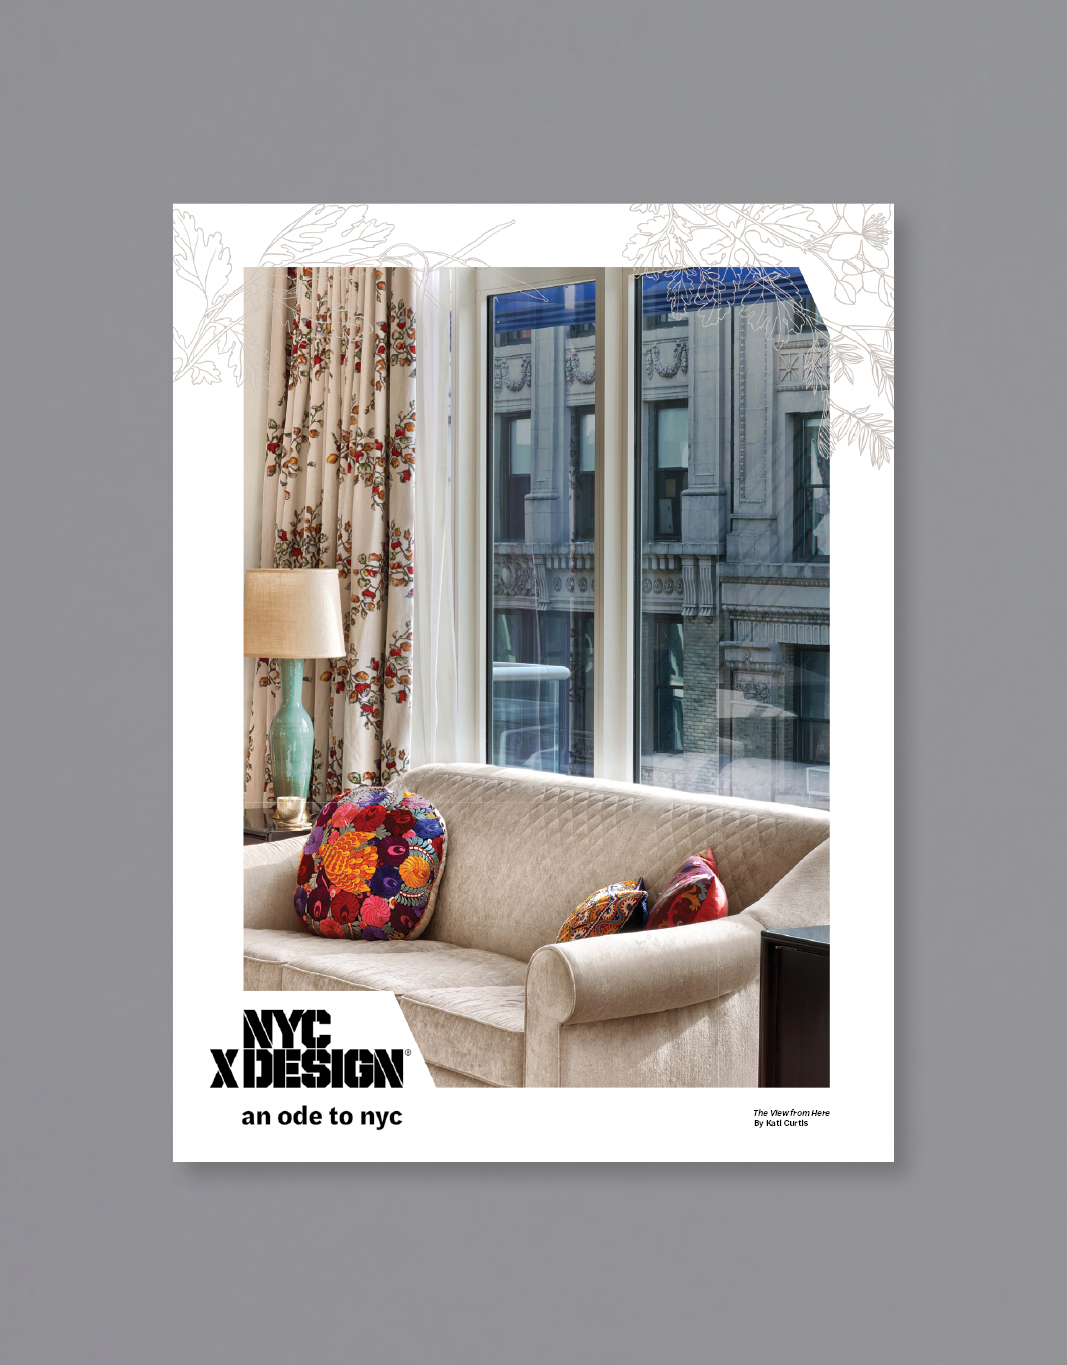 a poster showing a photo of New York apartment. There is a white couch, 3 colorful cushions, classic side lamp, and flower pattern curtain. The other side of building is visible through the big window.